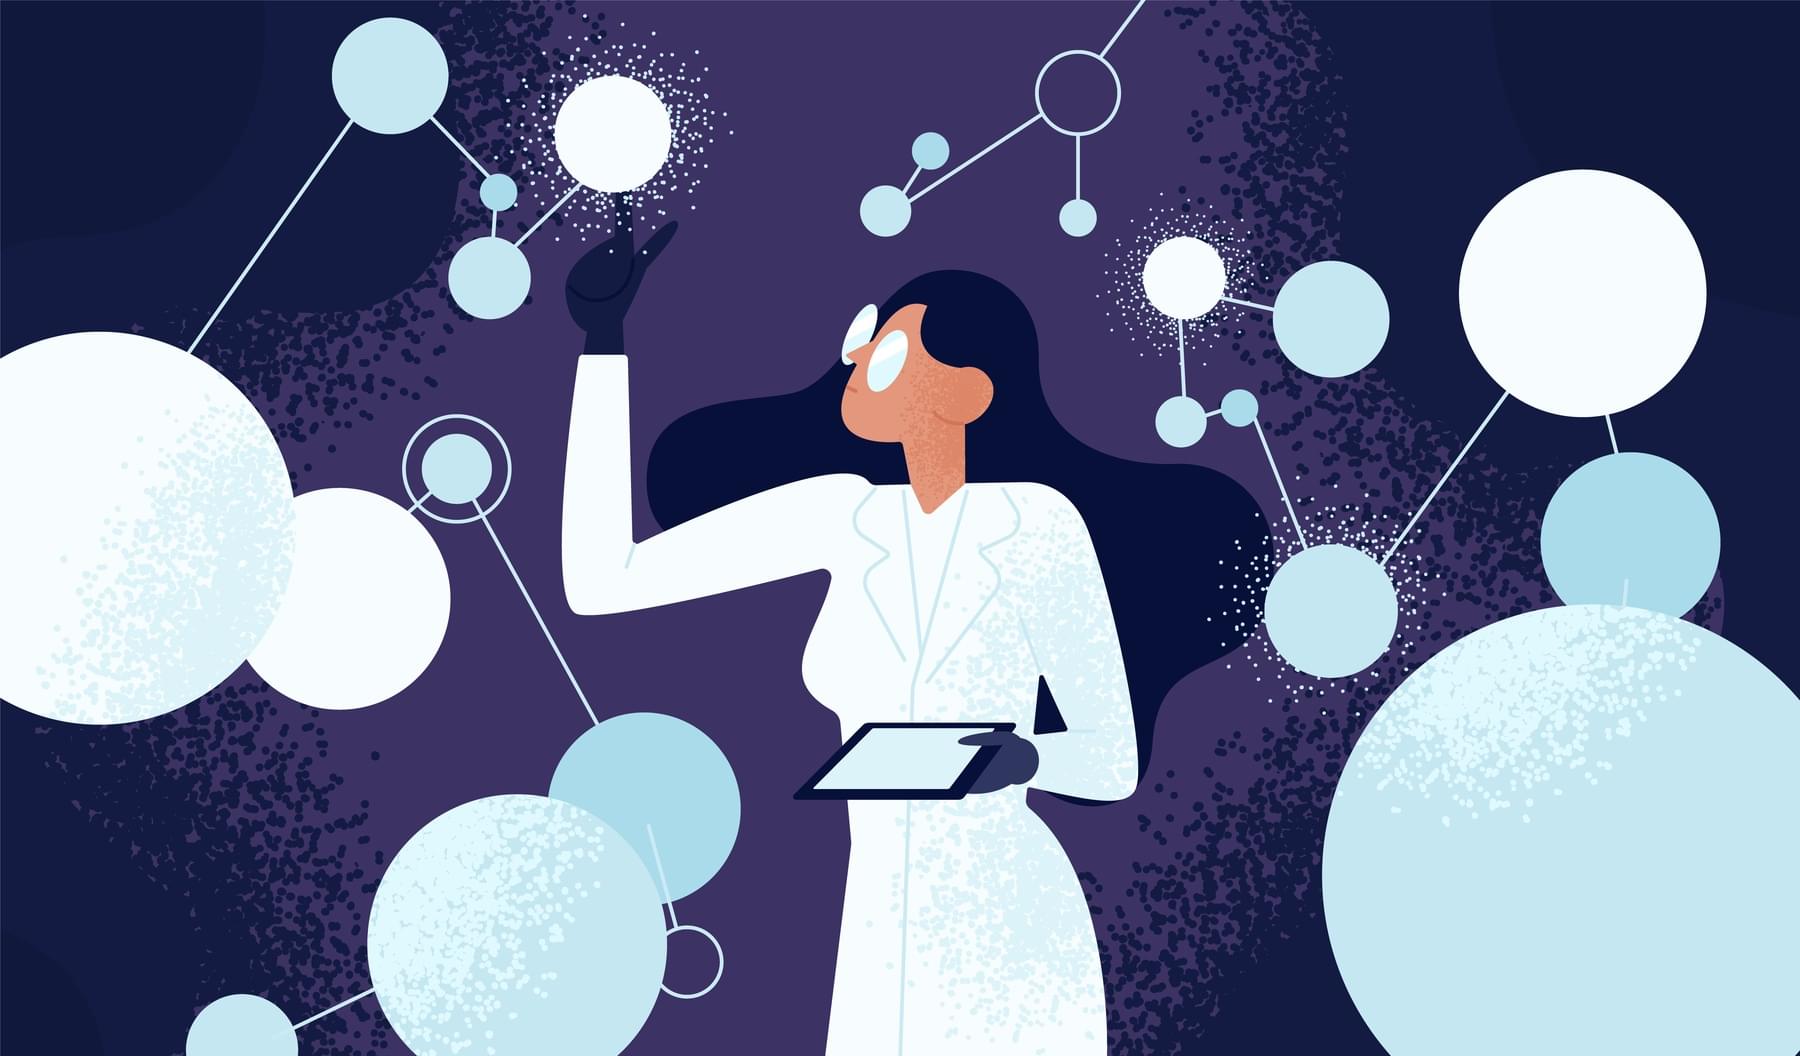 Cartoon female scientist holding a tablet examines neural networks